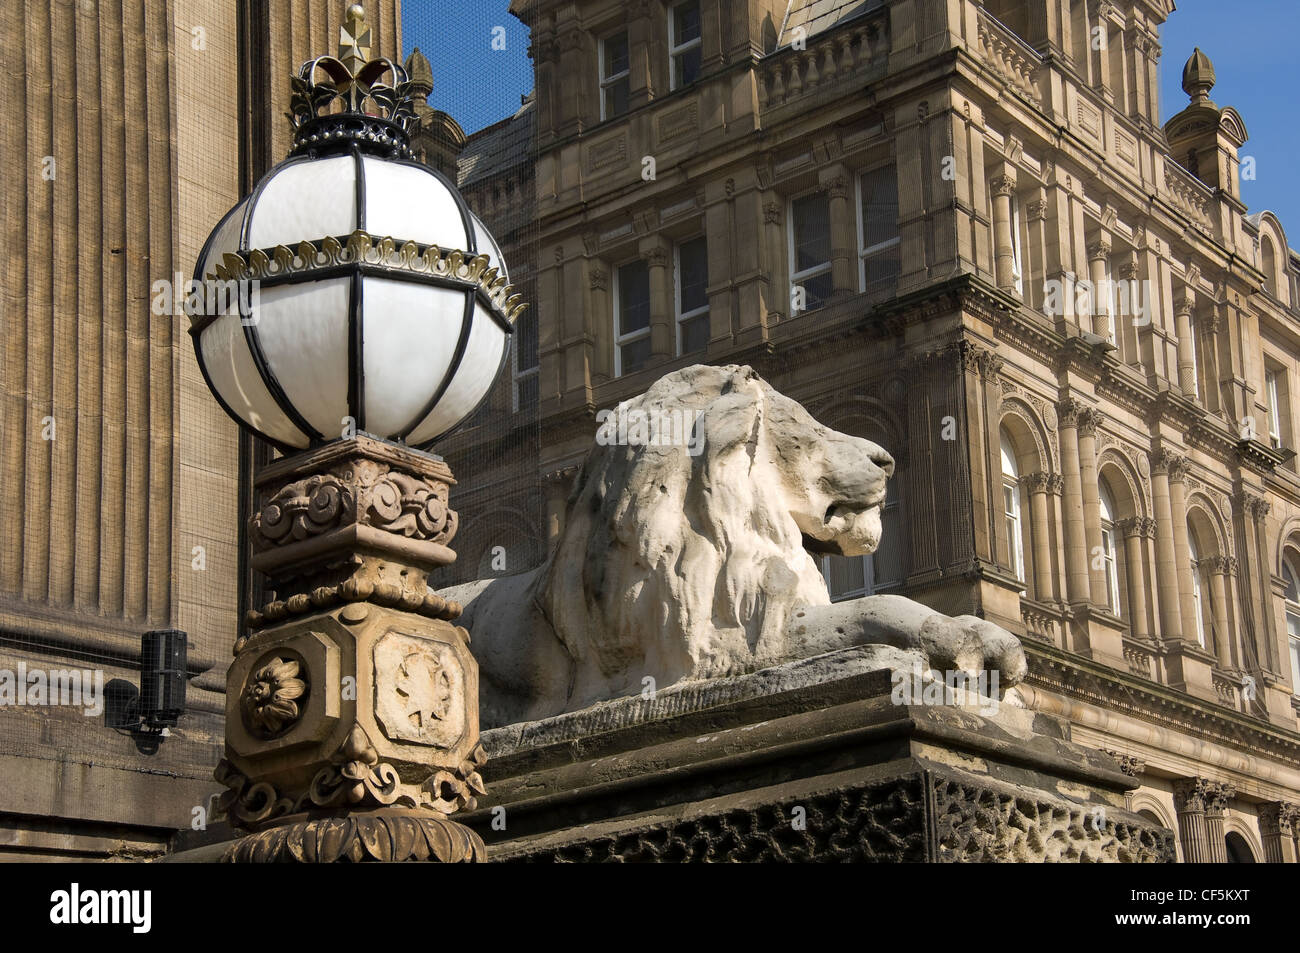 A carved lion on a plinth and ornate lamp outside Leeds Town Hall on The Headrow, the main street in Leeds City Centre. Stock Photo